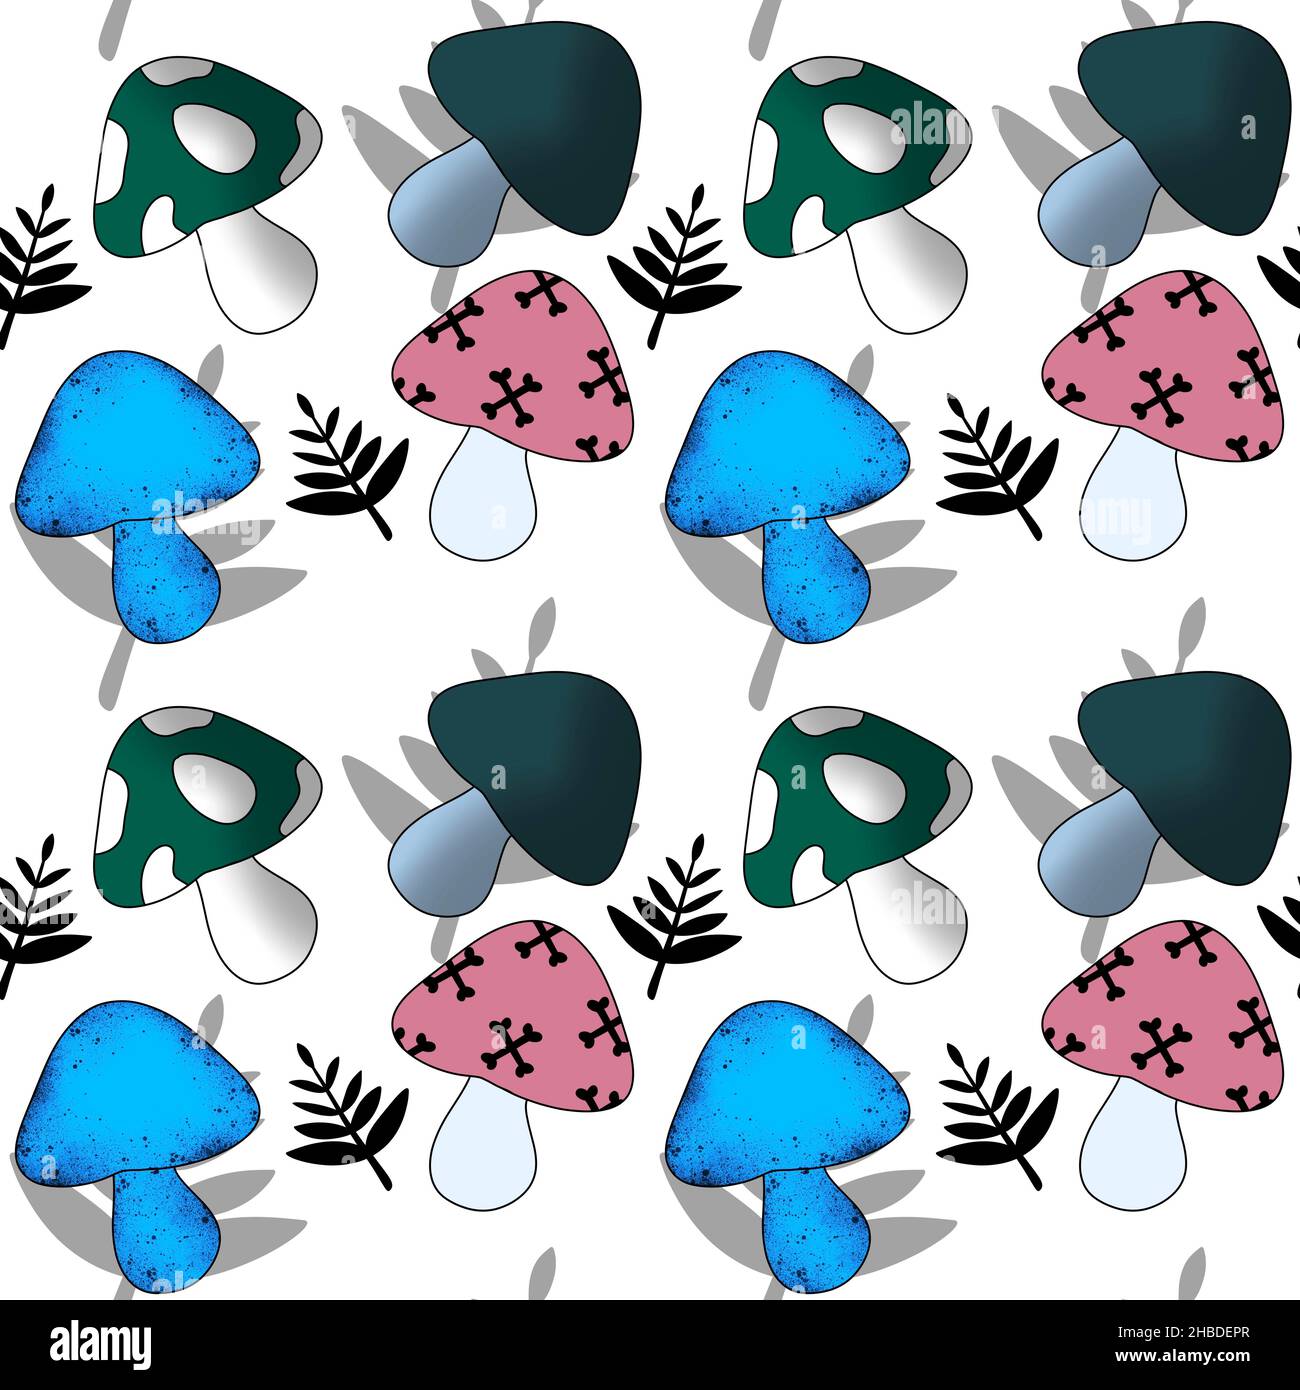 Seamless pattern with mushrooms on white background Stock Photo